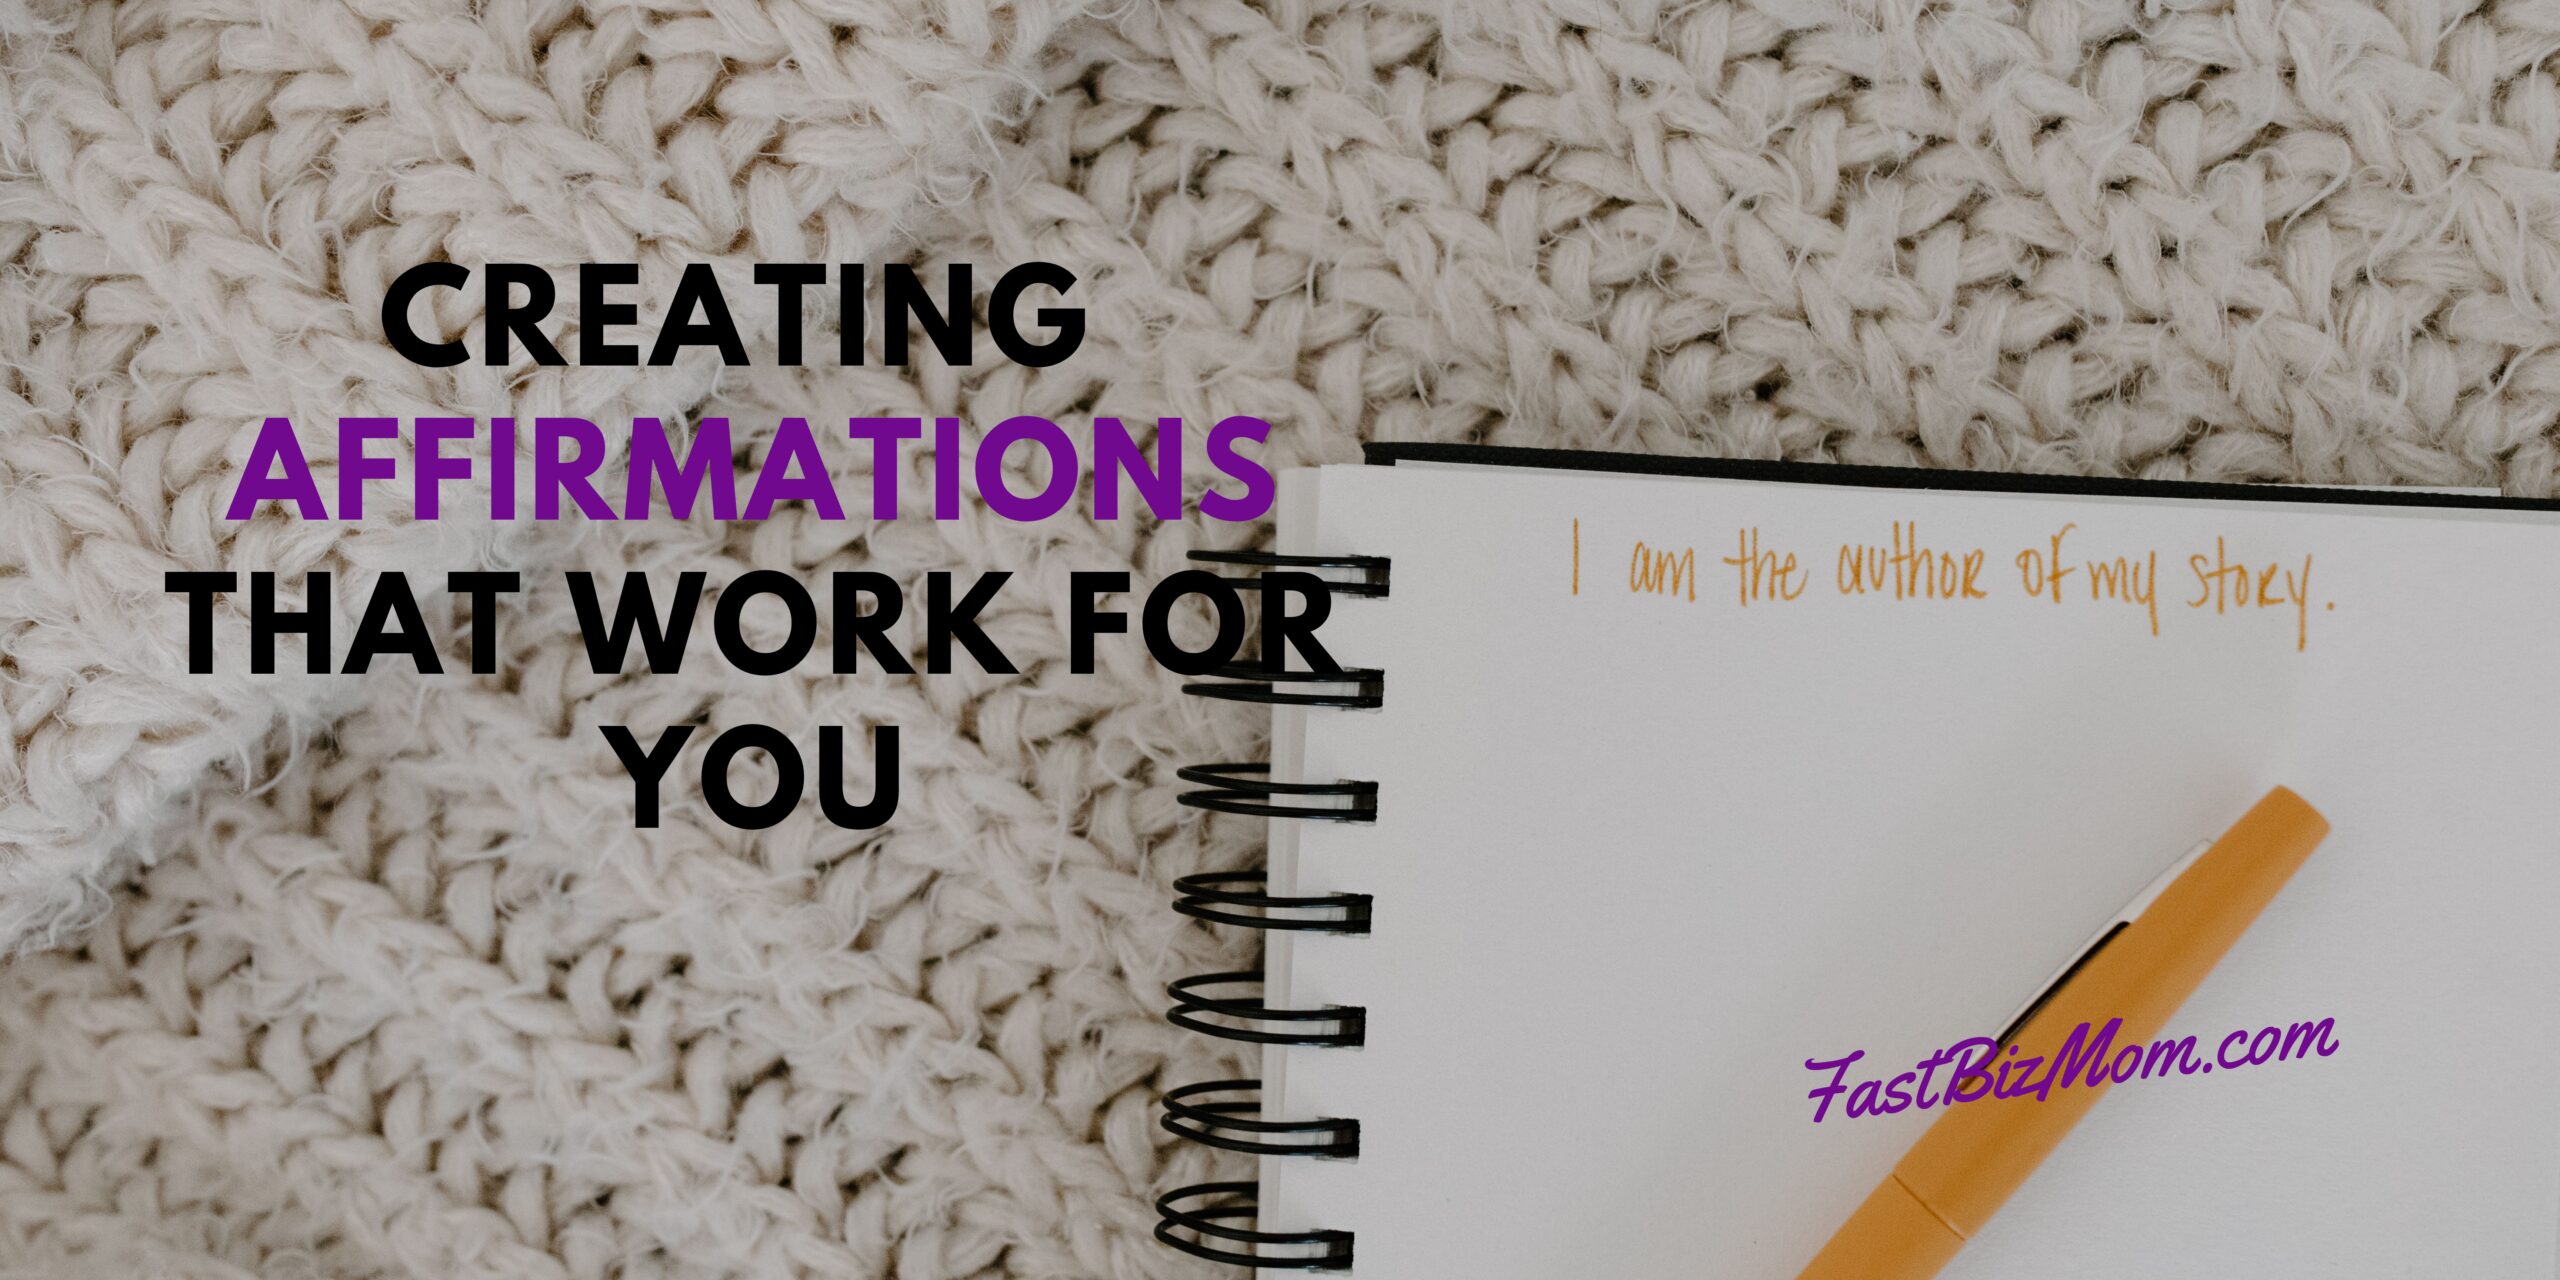 Steps to Creating Affirmations that Work for You